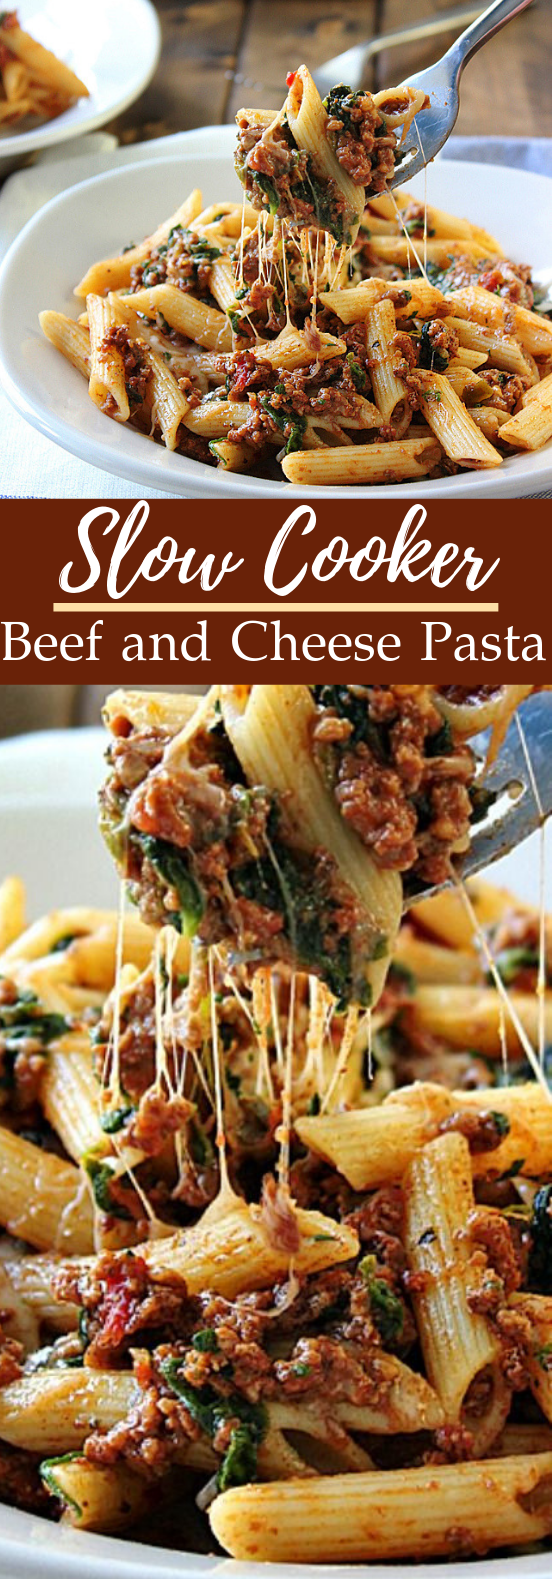 Slow Cooker Beef and Cheese Pasta #dinner #pasta